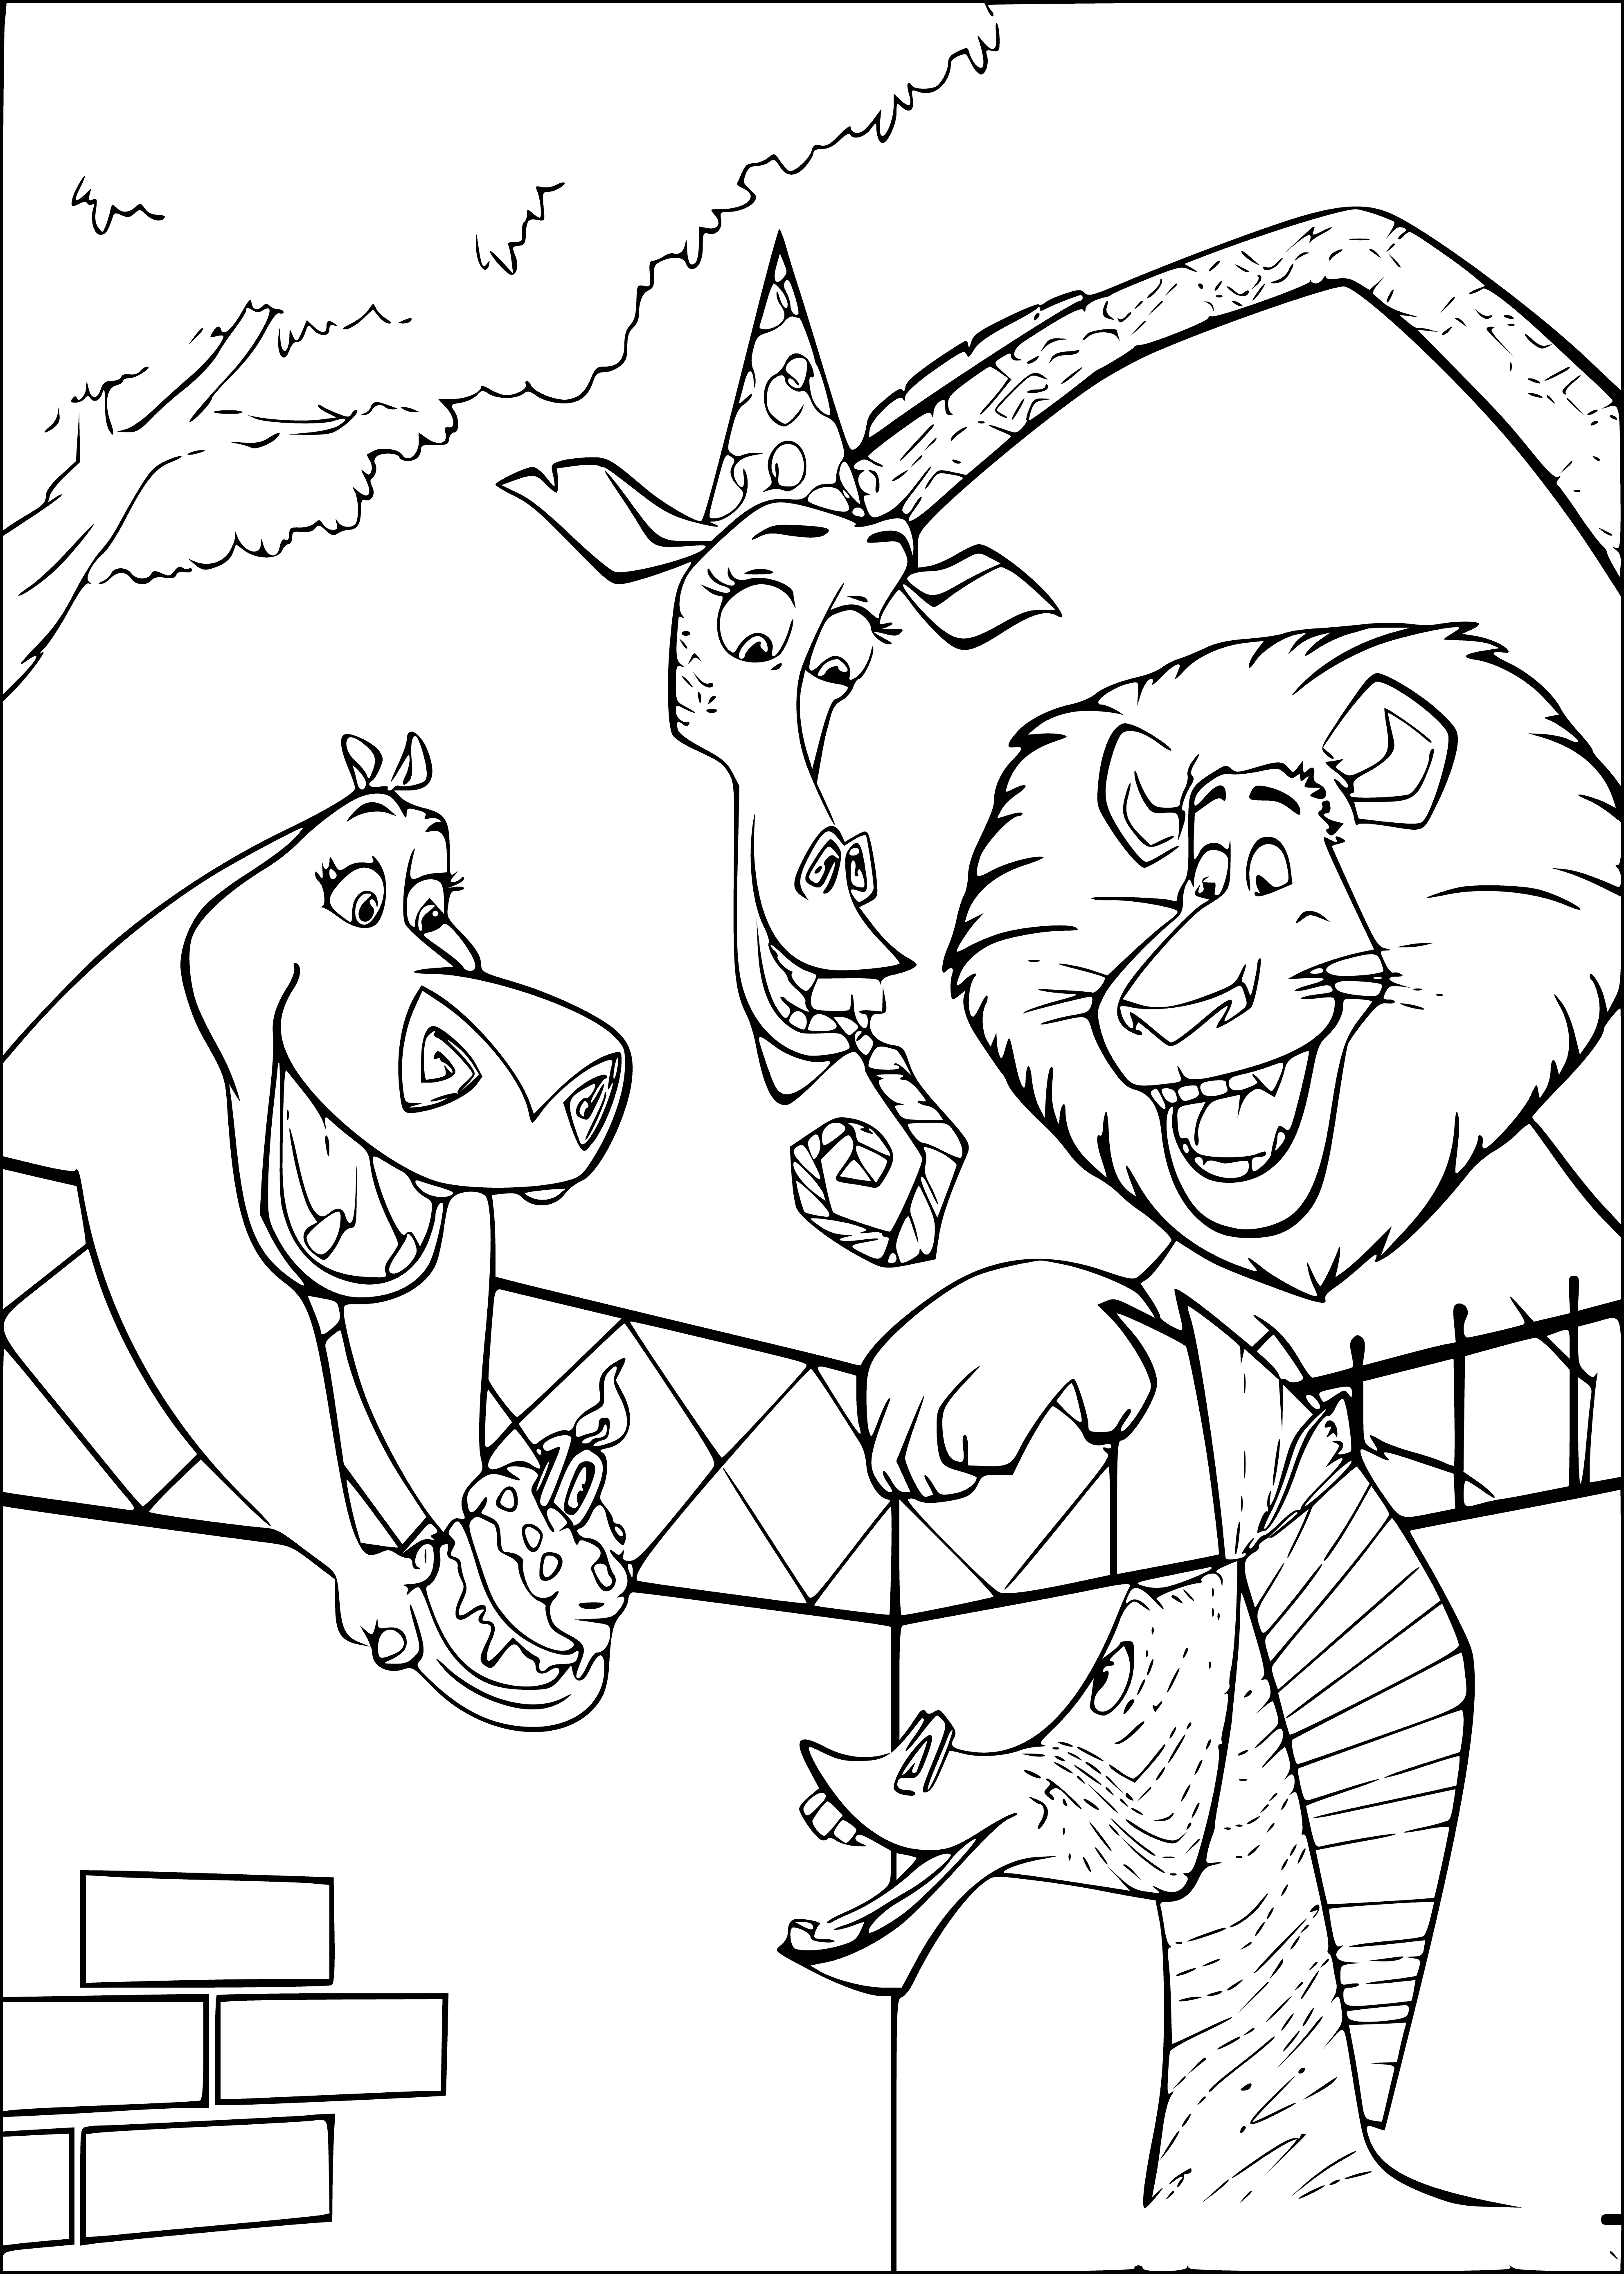 coloring page: The gang throws Marty a bday bash; Alex the lion, Melman the giraffe, Gloria the hippo and penguins join in the celebration. #PartyAnimals!